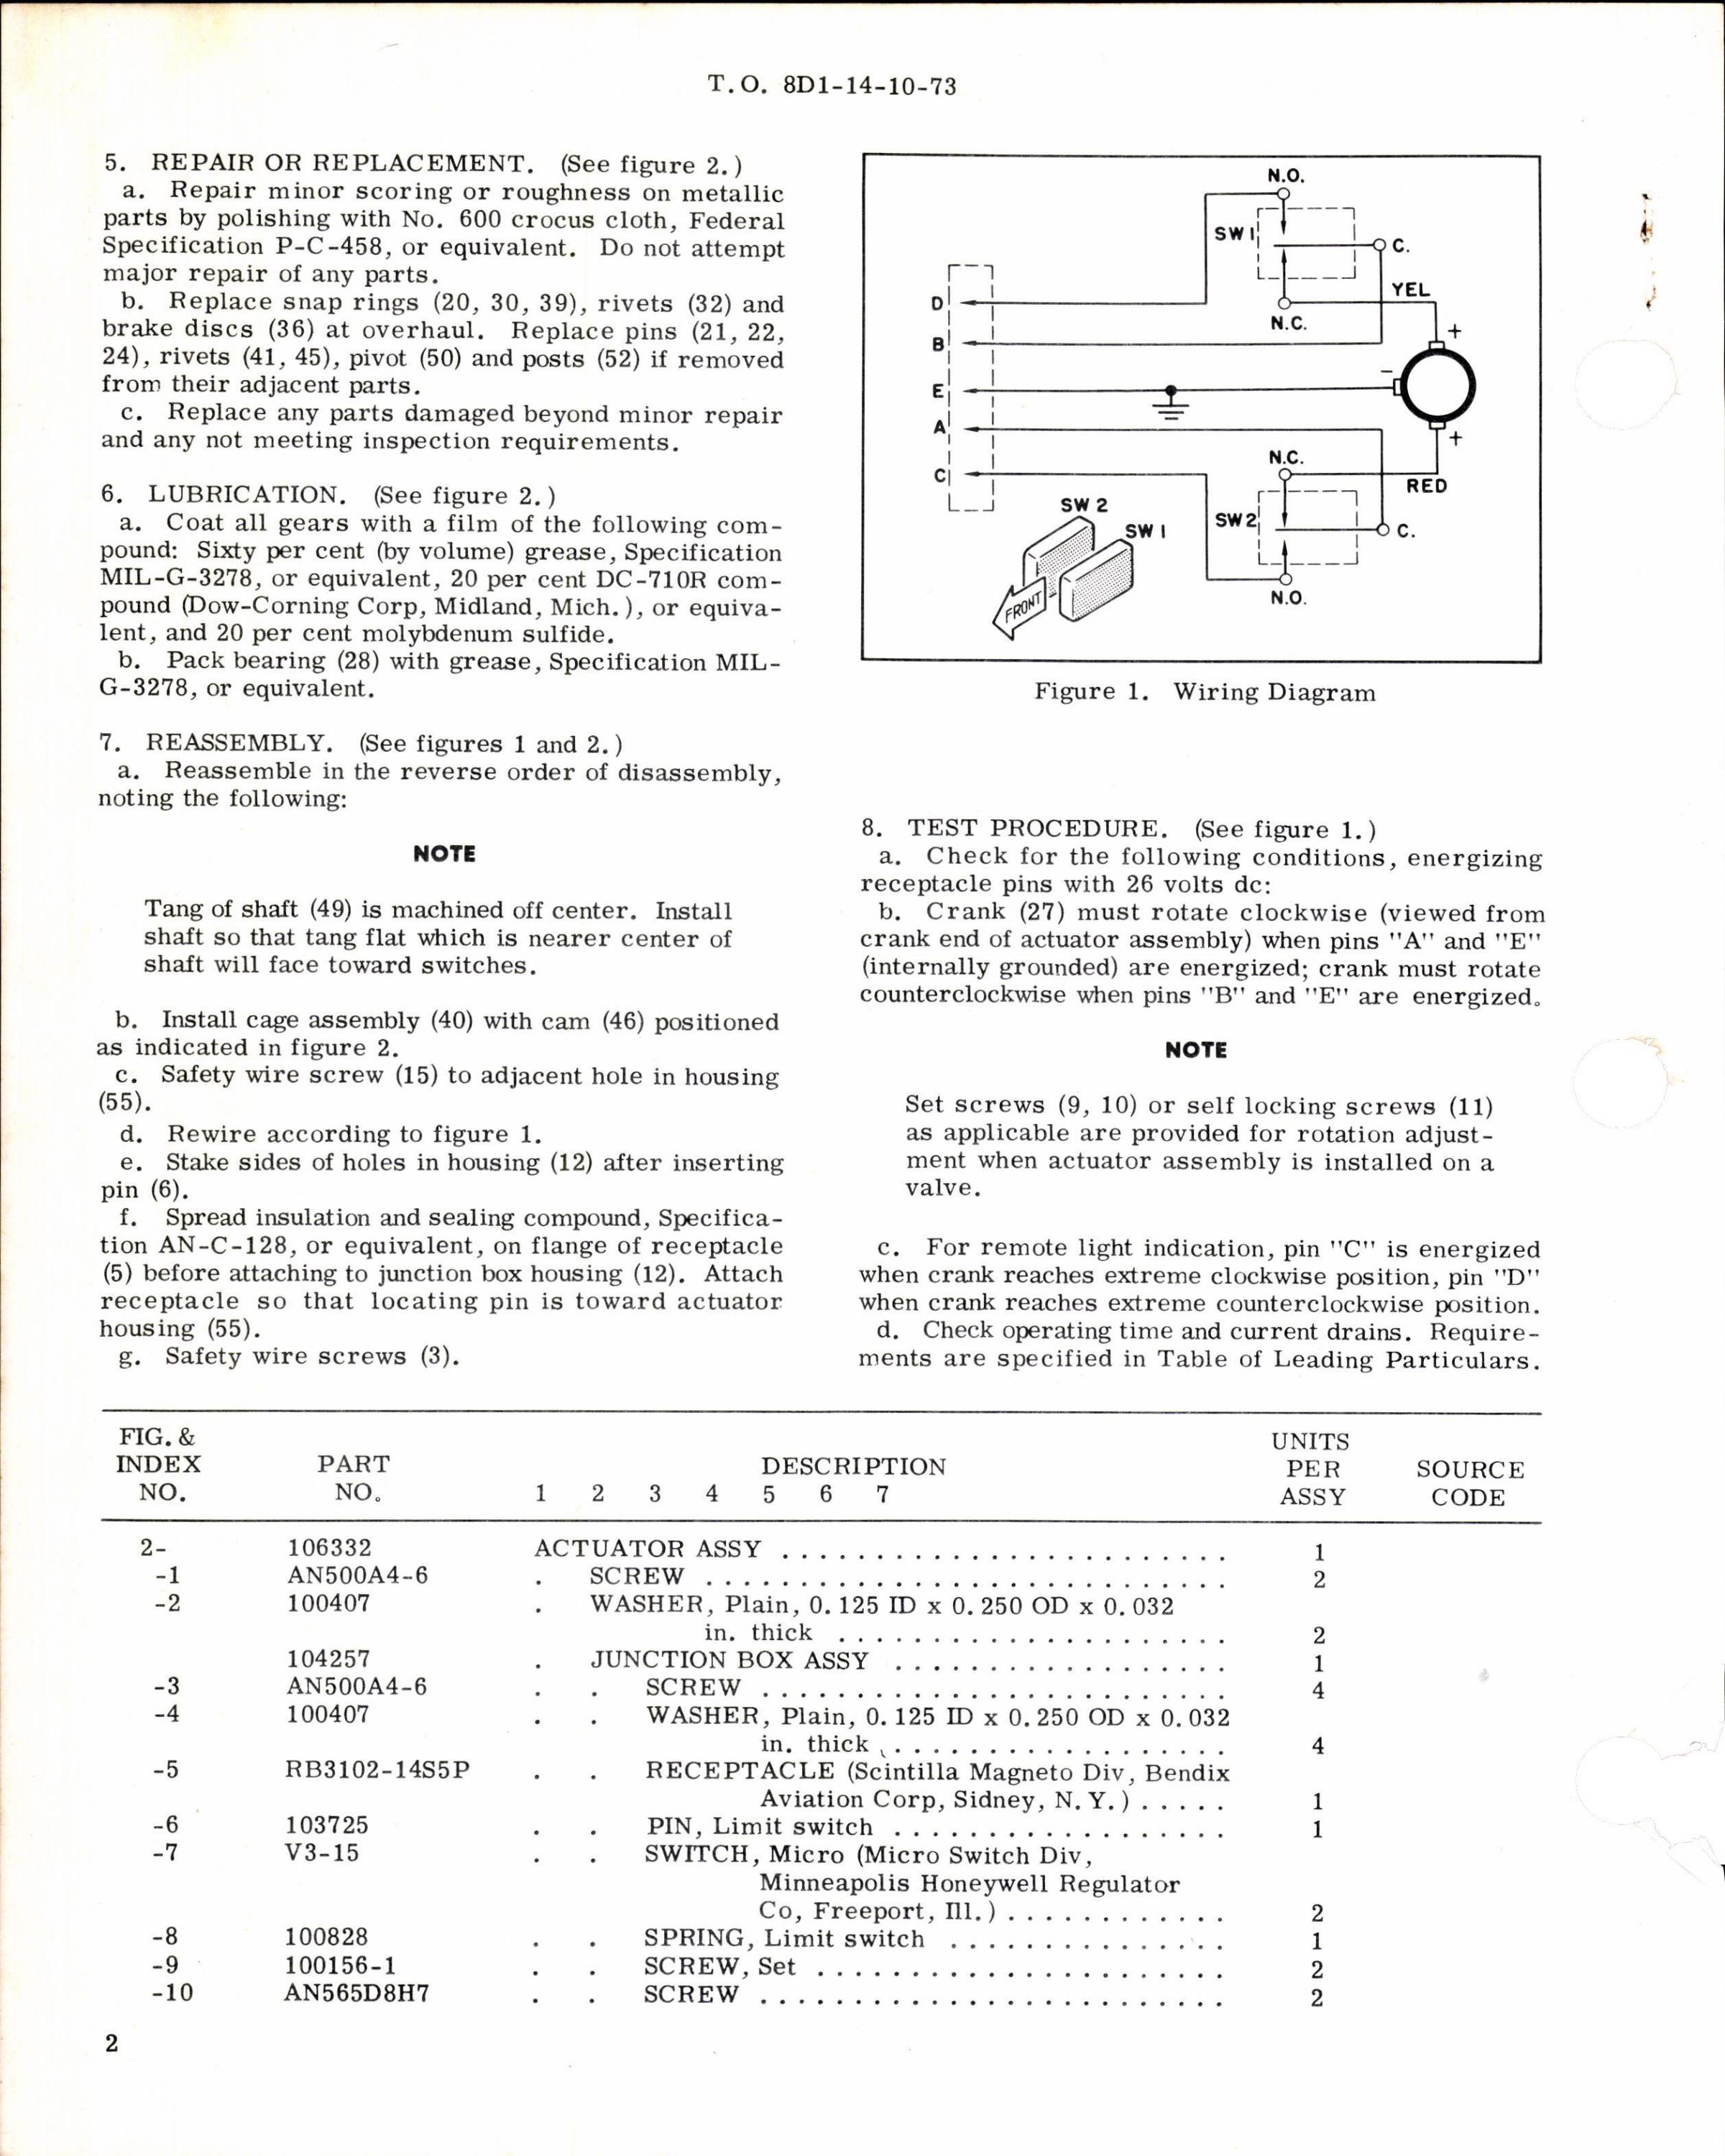 Sample page 2 from AirCorps Library document: Instructions w Parts Breakdown for Actuator Assembly Part 106332